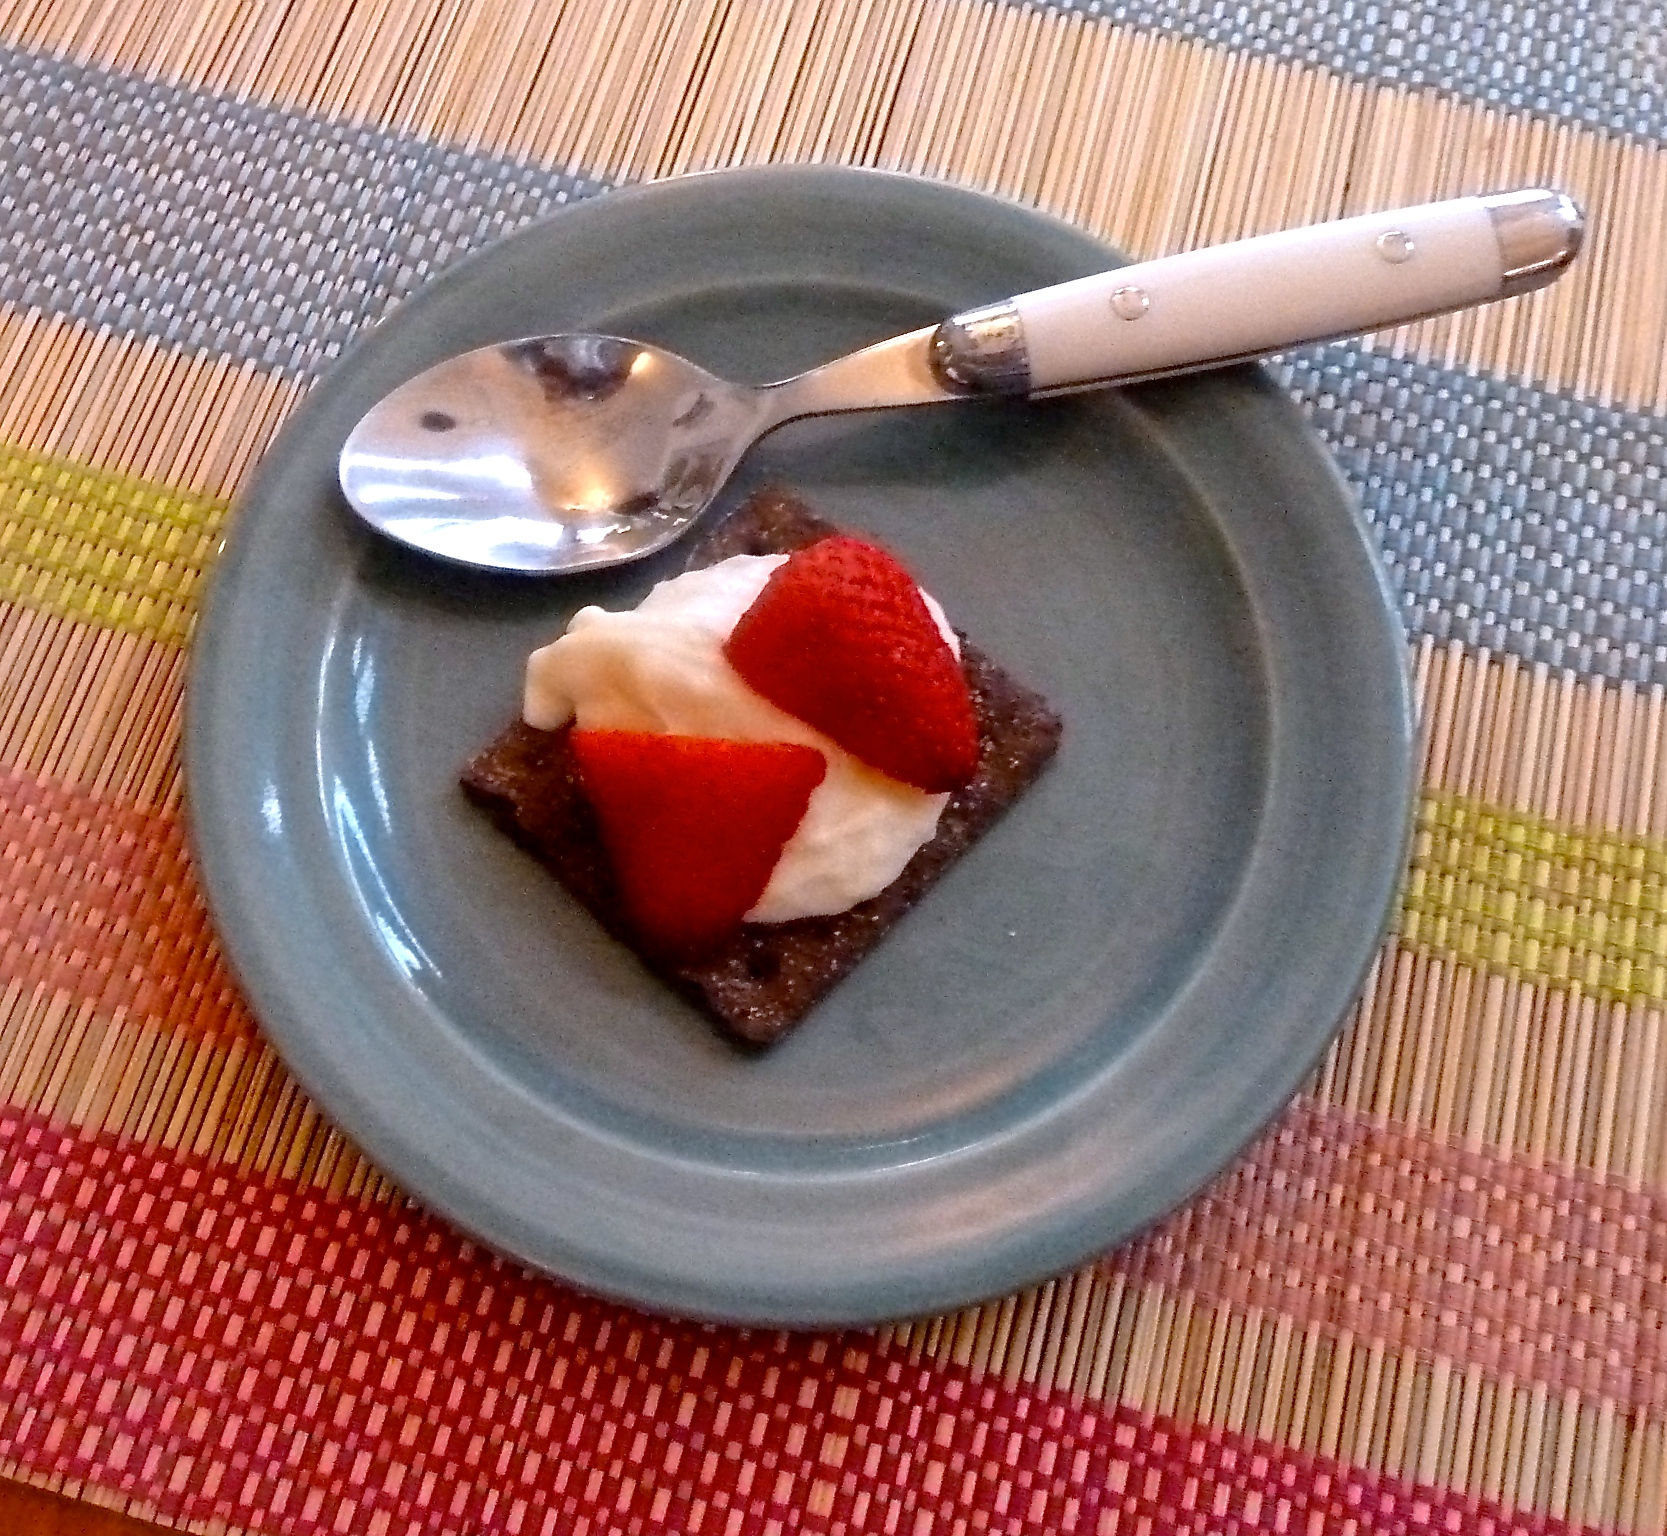 Chocolate Graham Crackers topped with Creamy Dessert Dip & Strawberries